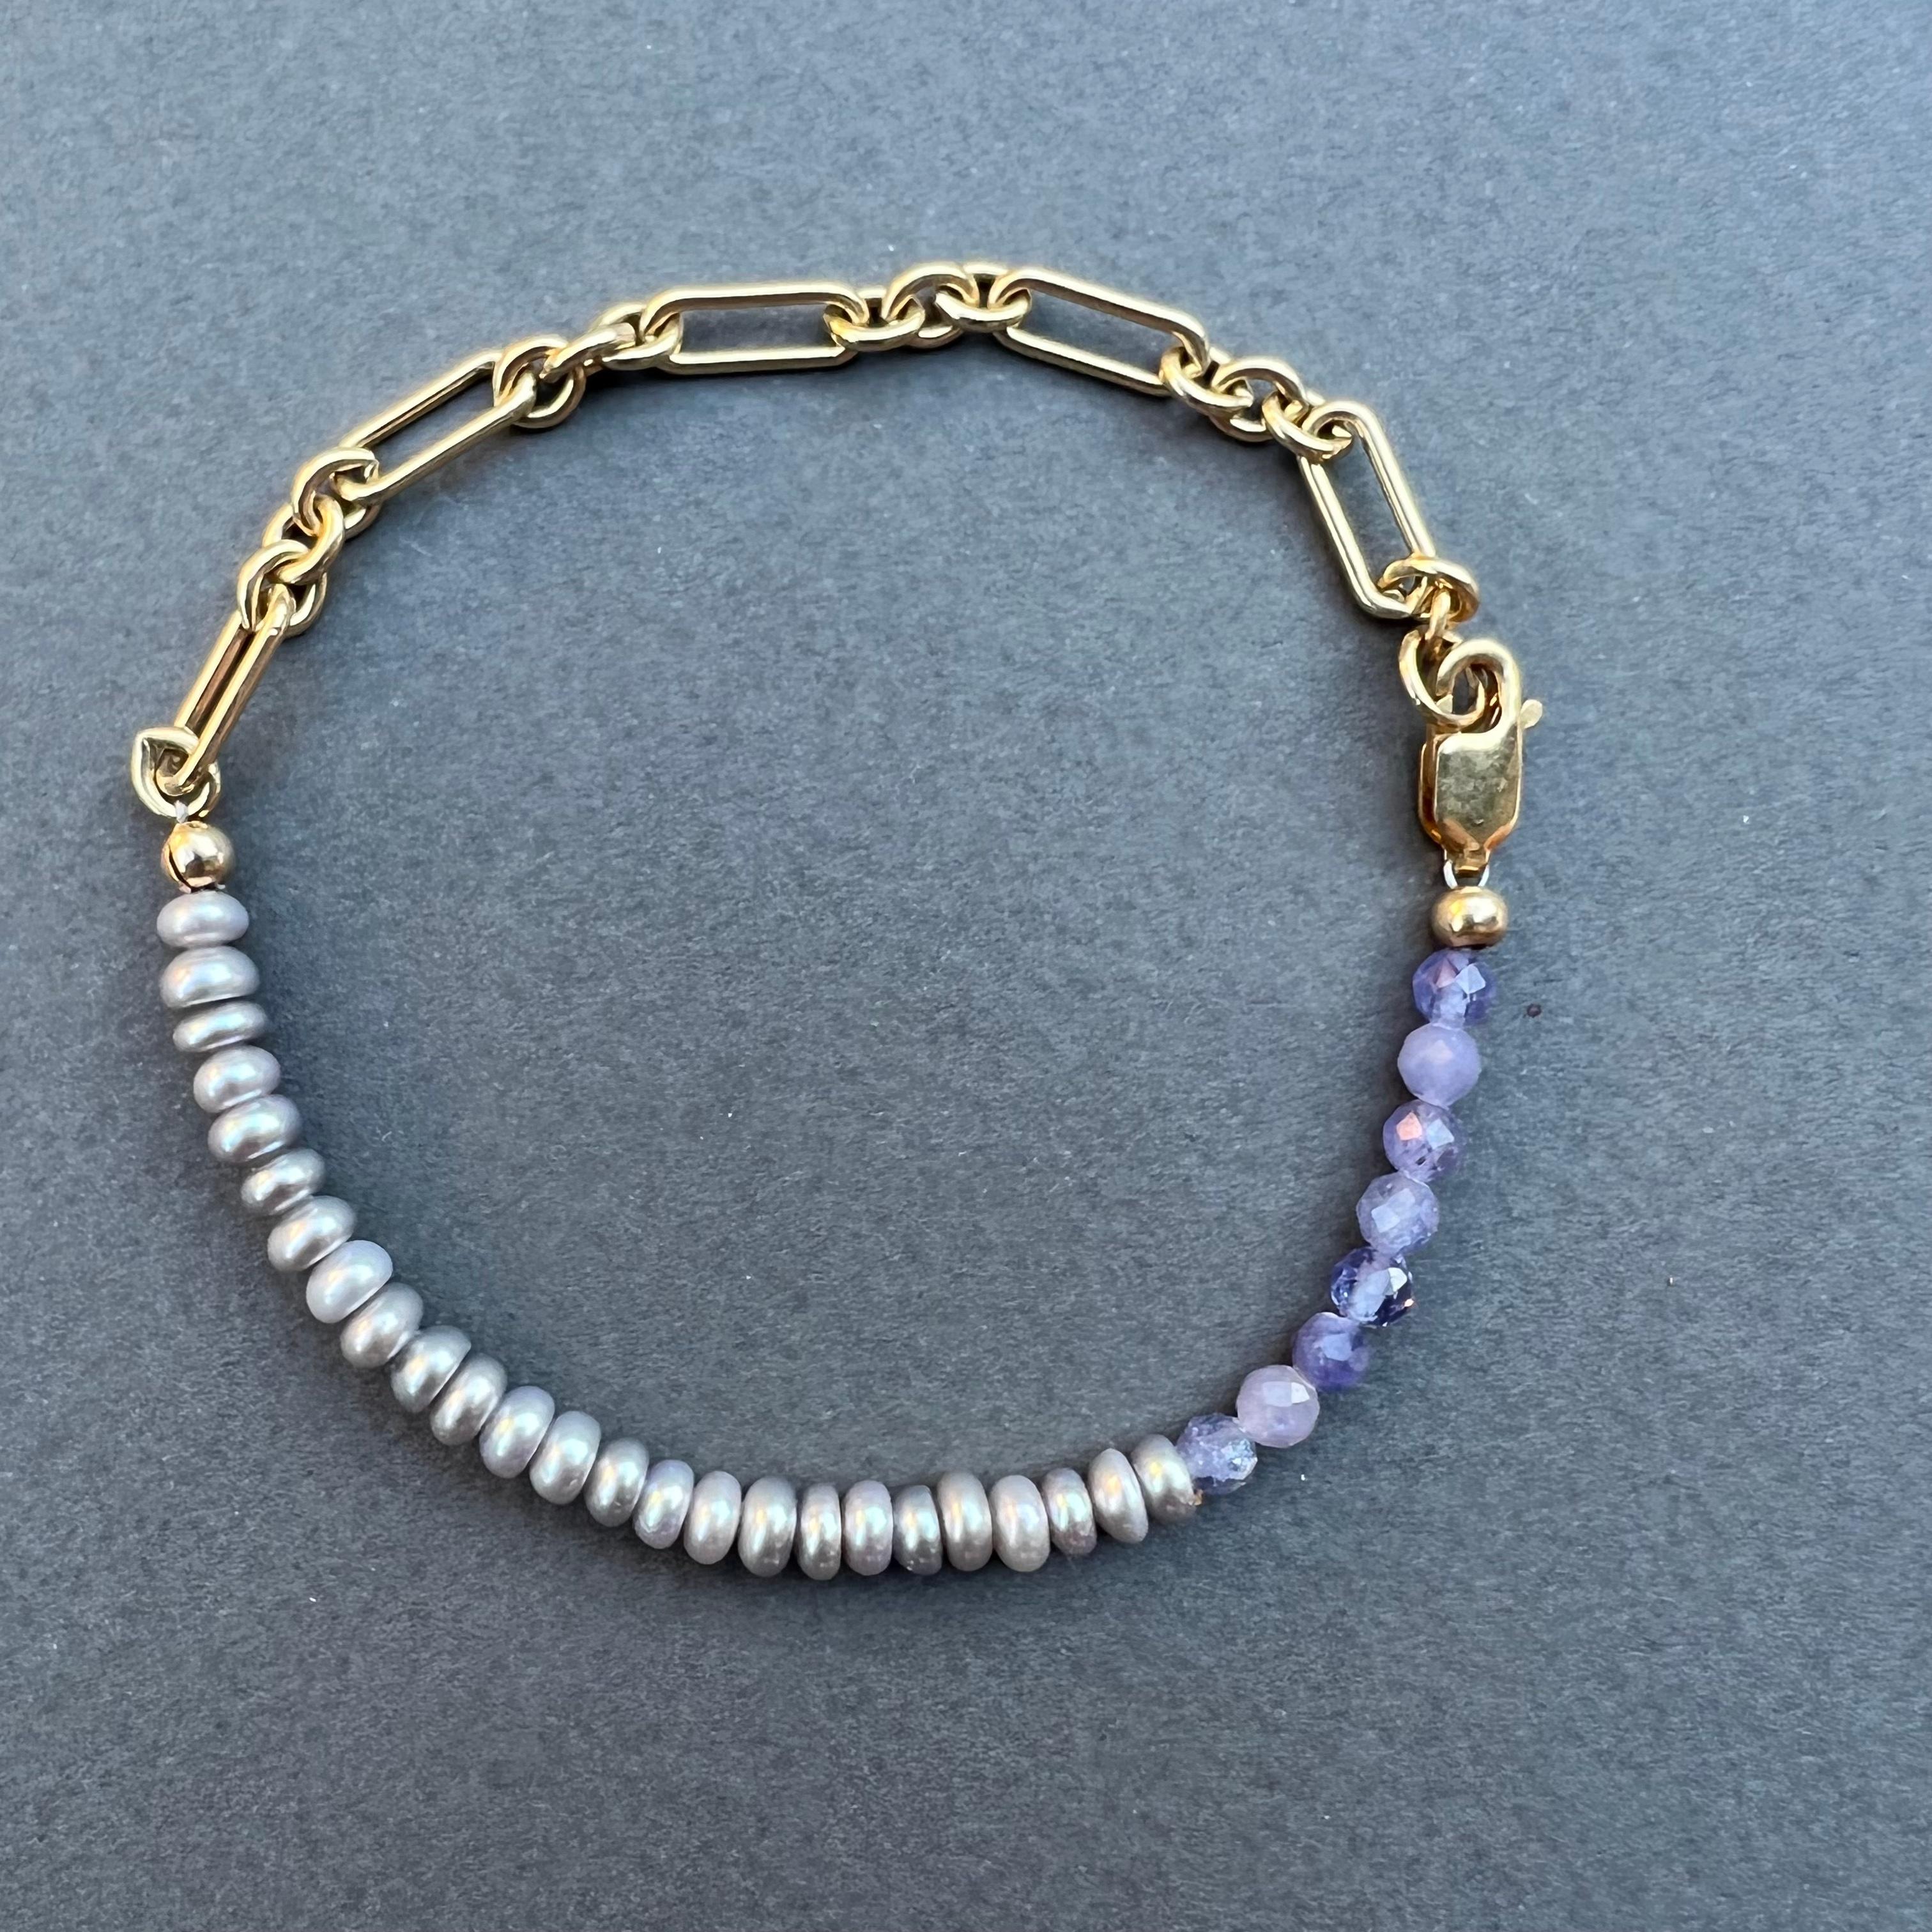 Pearl Tanzanite Ankle Bracelet Beaded Gold Filled Chain J Dauphin
can also be used as a bracelet as chain is adjustable

